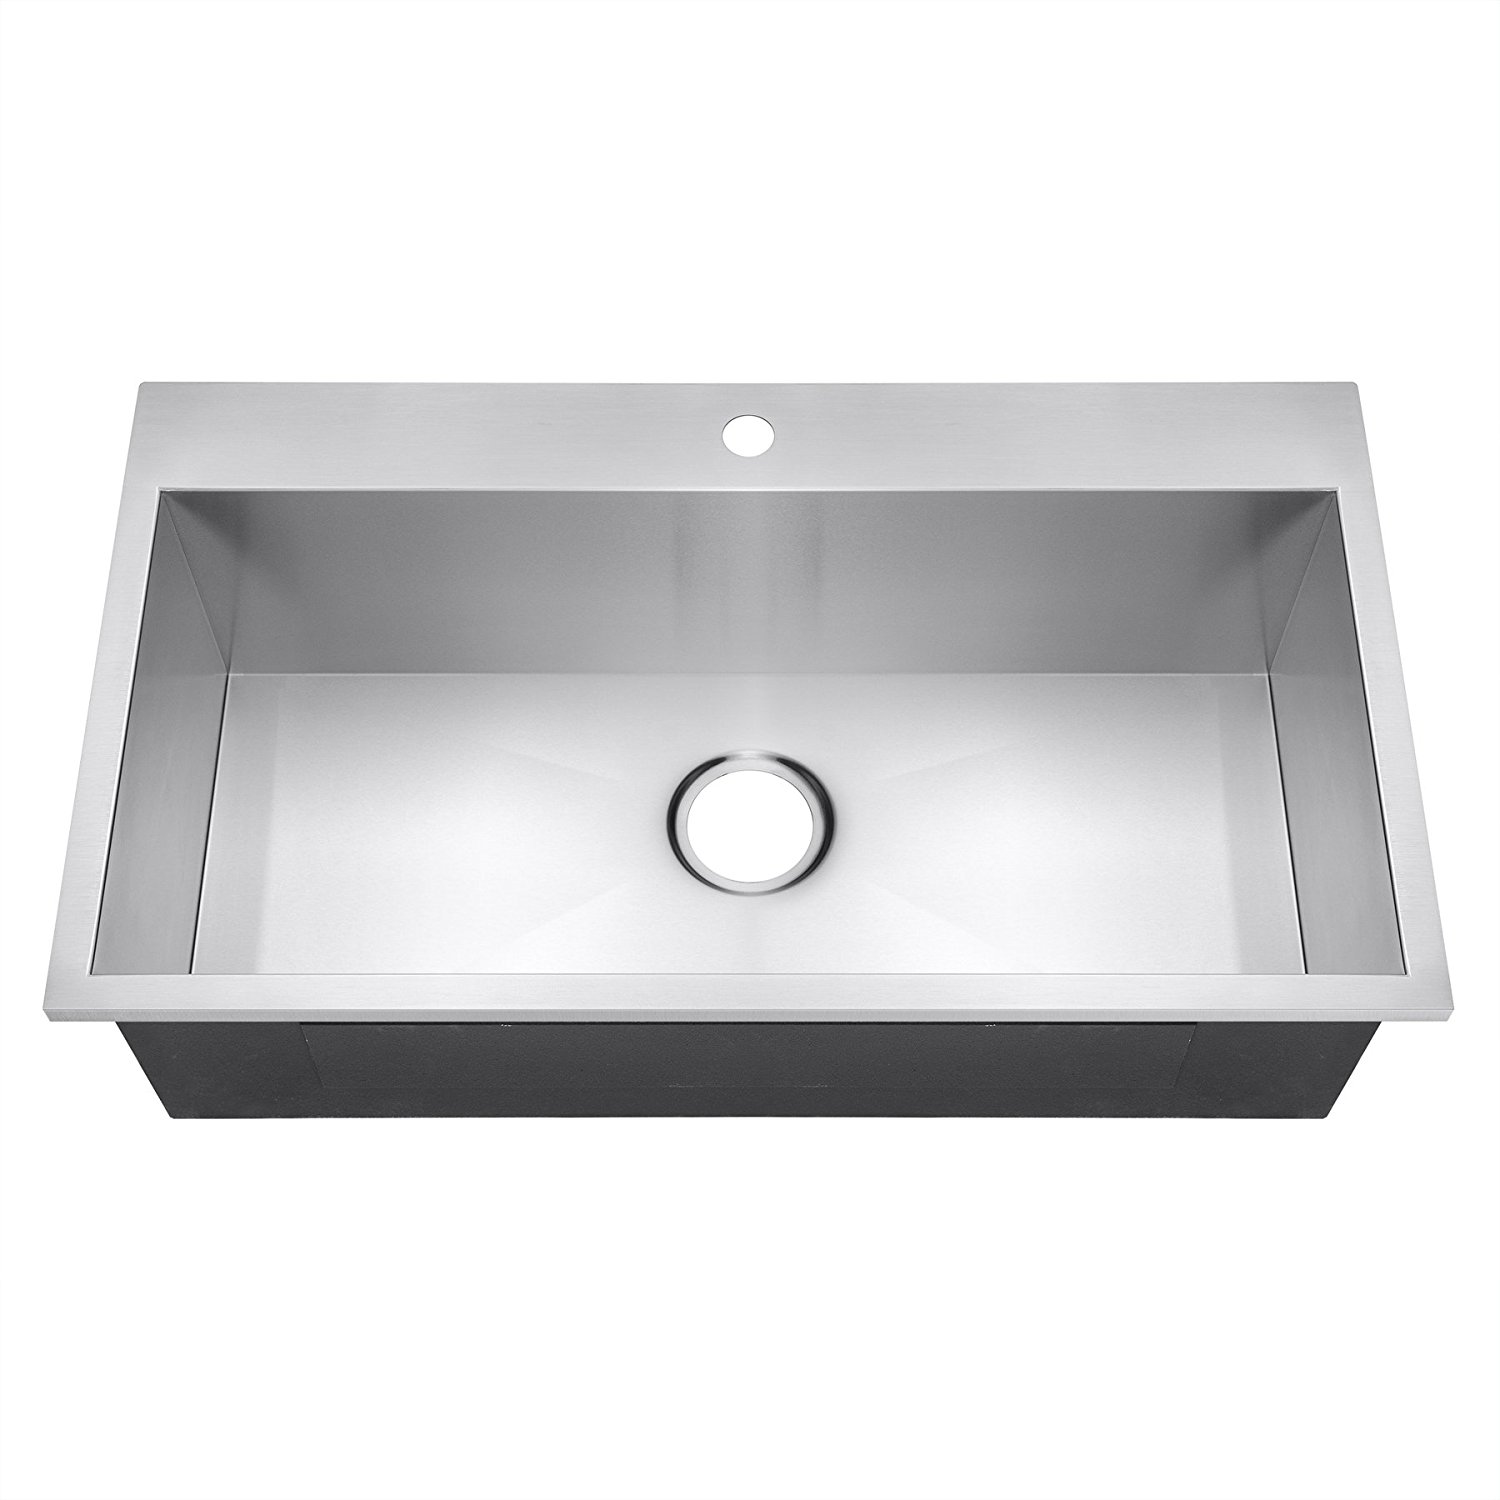 Stainless Steel Handmade Topmount Kitchen Sink with Faucet Hole